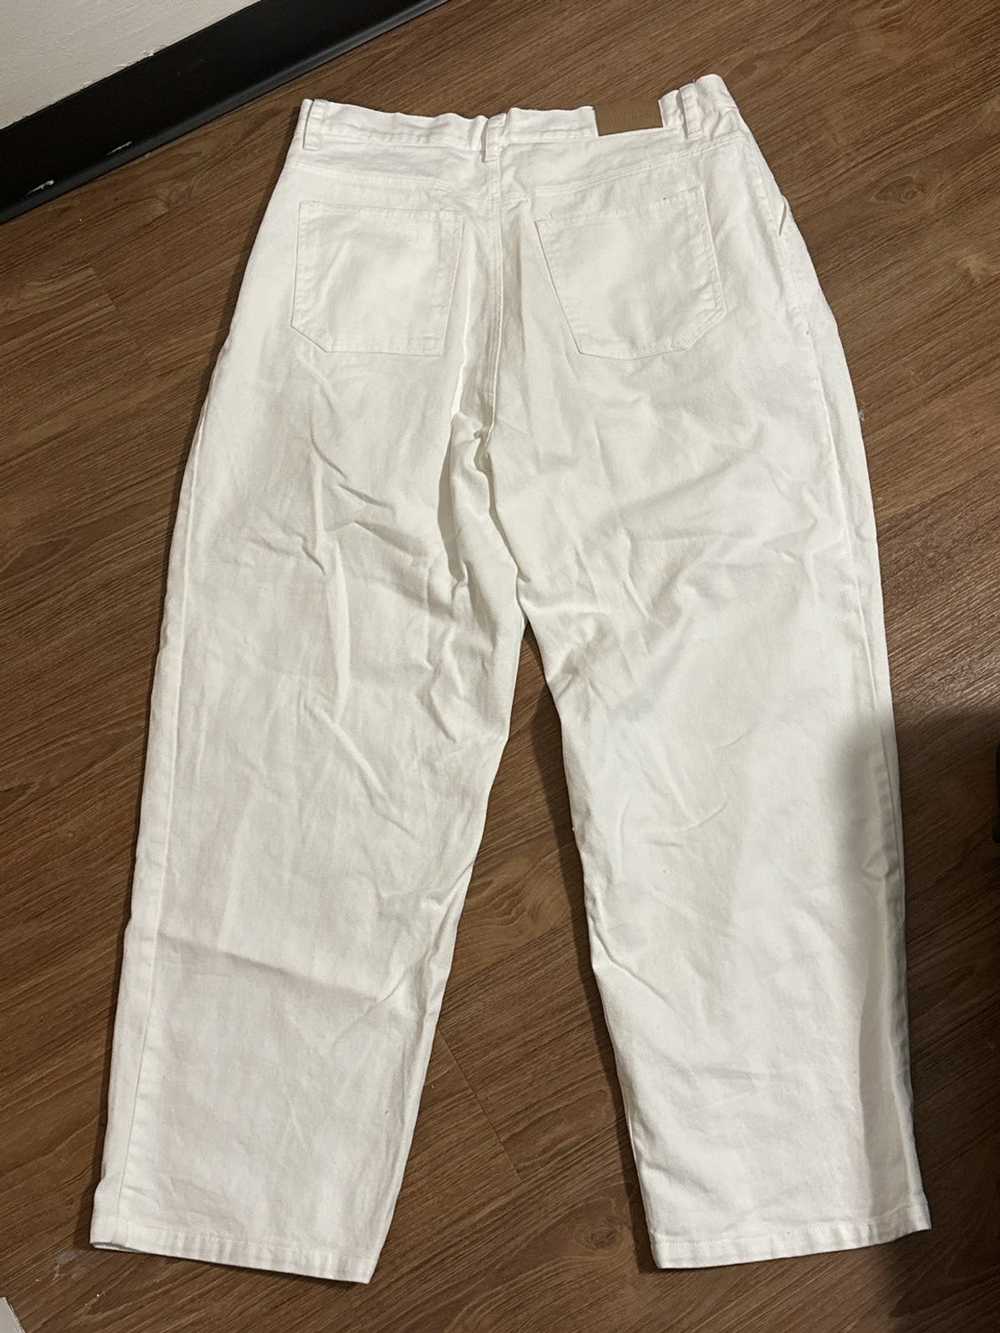 Other Korean Brand White Wide Pants - image 2